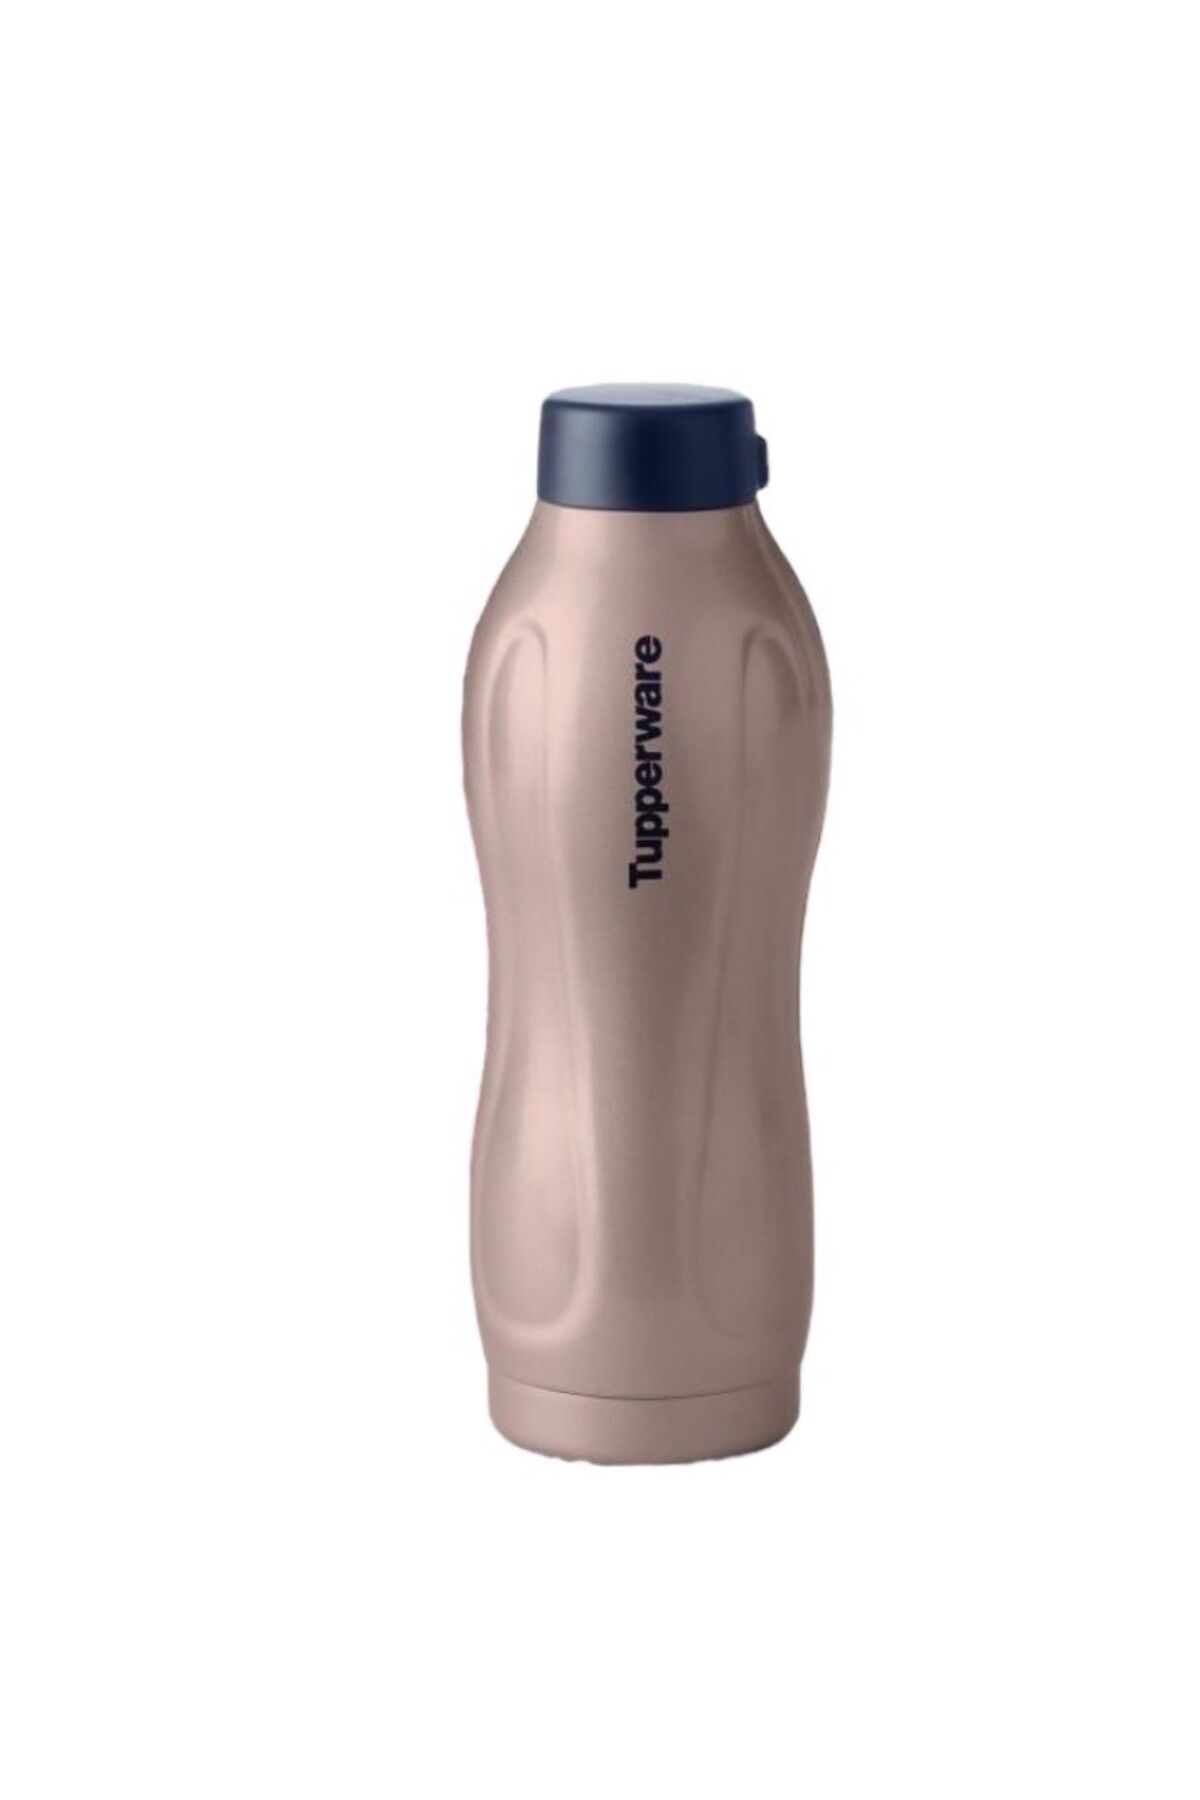 Tupperware Eco Steel Insulated 550ml Bottle Water Bottle Thermos Insulated  550ml - Trendyol